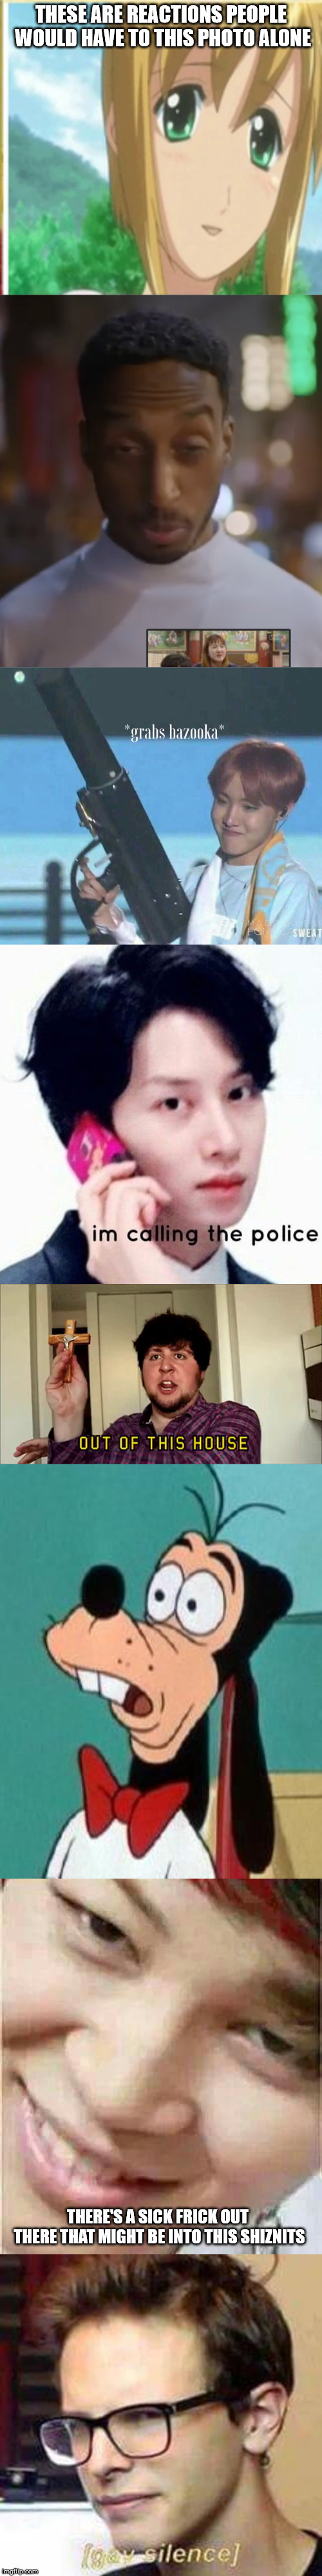 heed this warning and keep your innocents...you've been warned....don't search for this  | THESE ARE REACTIONS PEOPLE WOULD HAVE TO THIS PHOTO ALONE; THERE'S A SICK FRICK OUT THERE THAT MIGHT BE INTO THIS SHIZNITS | image tagged in wtf,kpop,too funny,funny memes,funny meme,funny | made w/ Imgflip meme maker